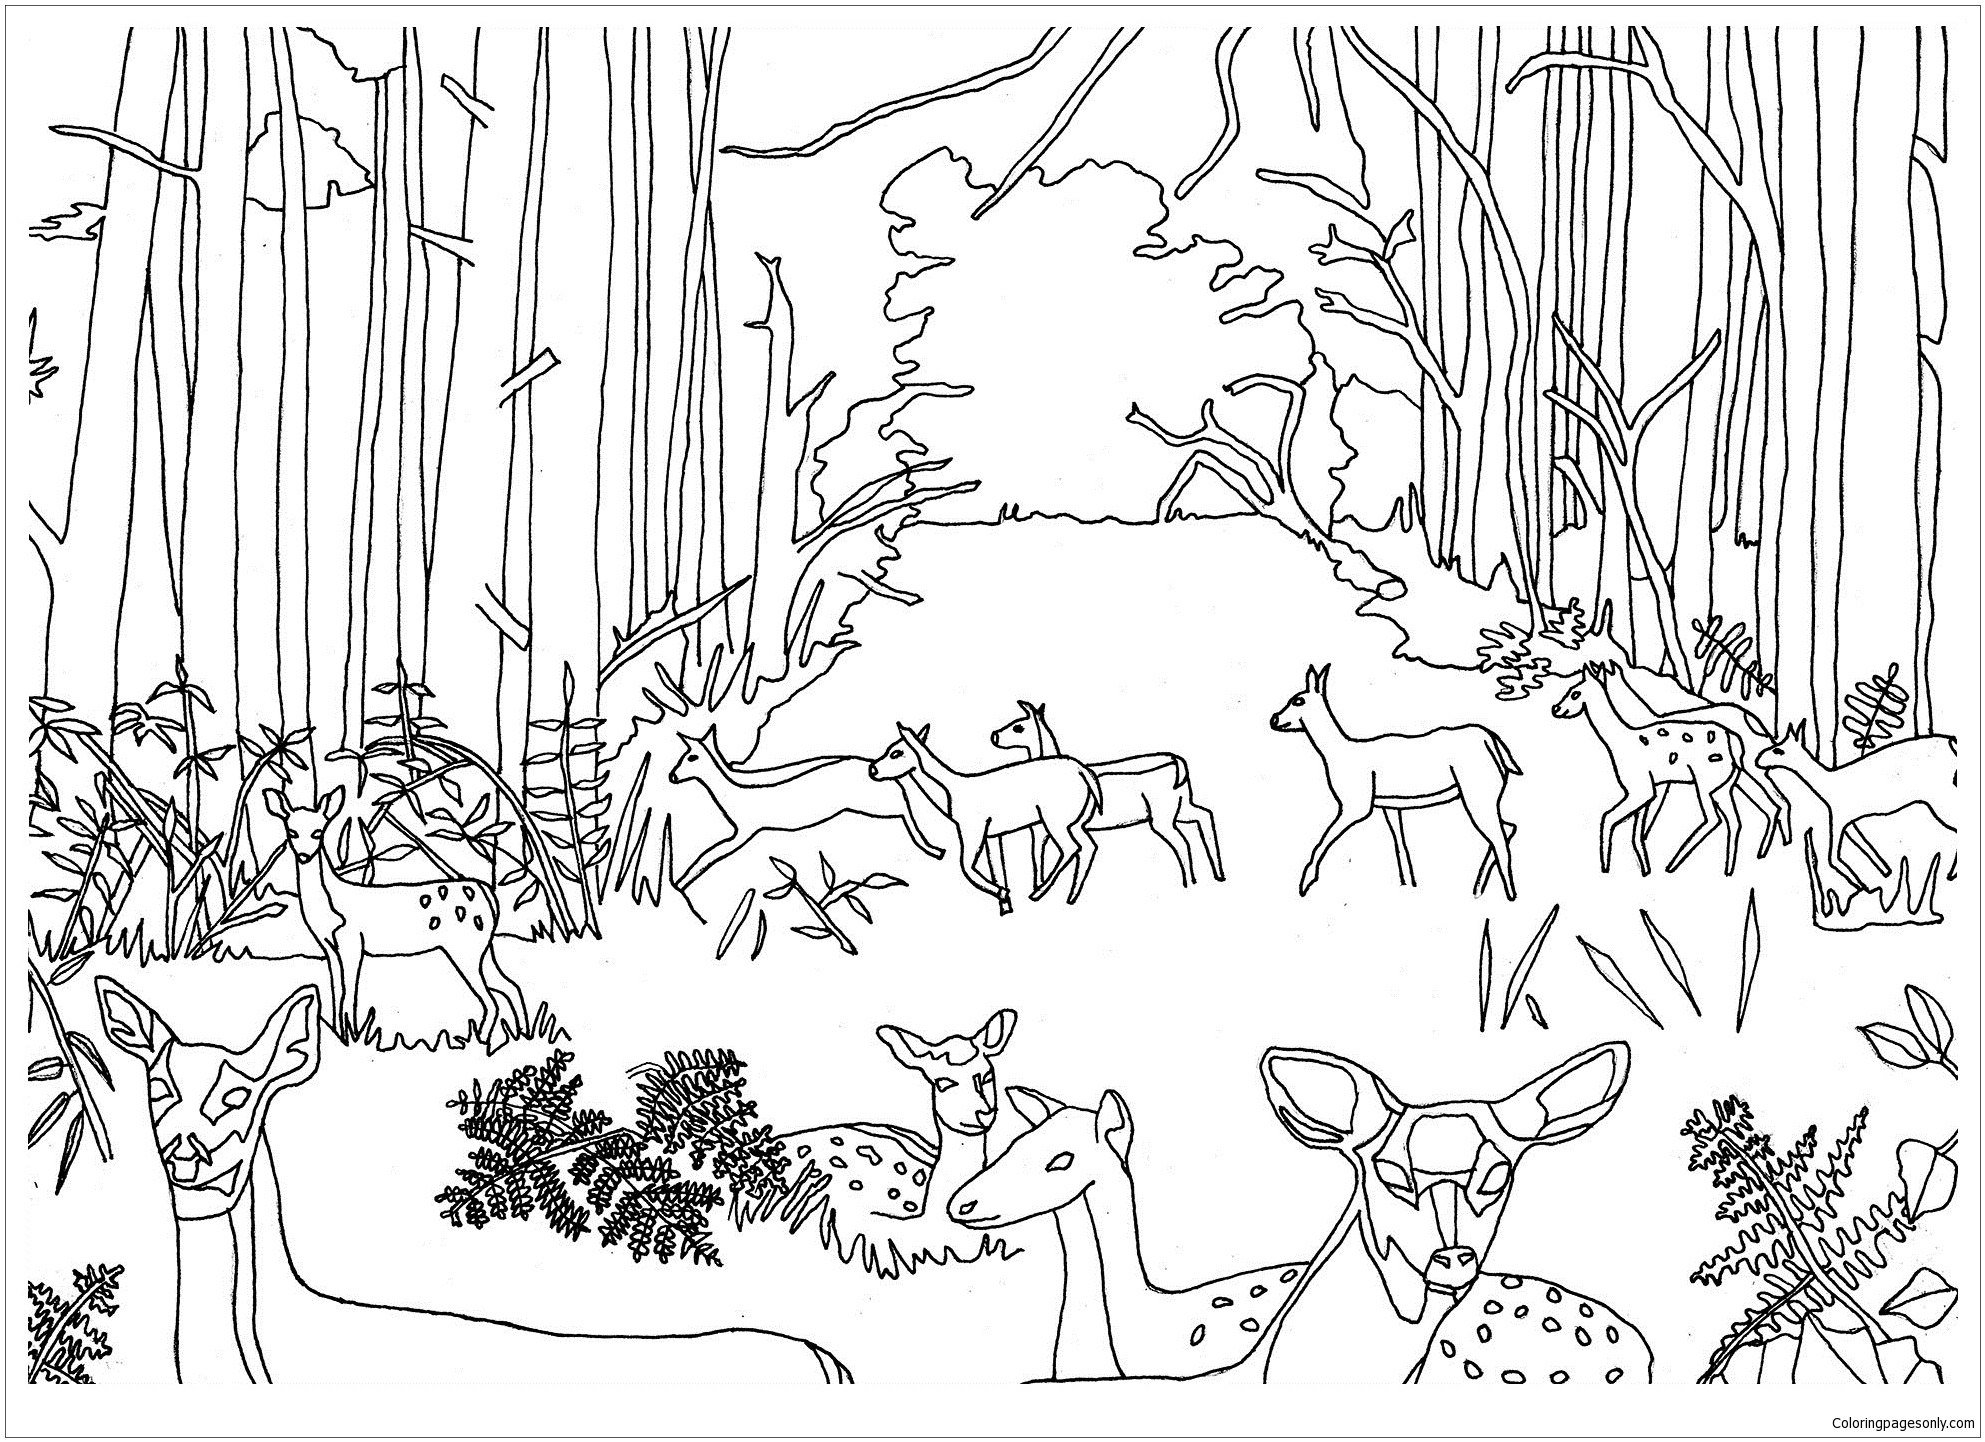 Does and fawns in forest from Forest